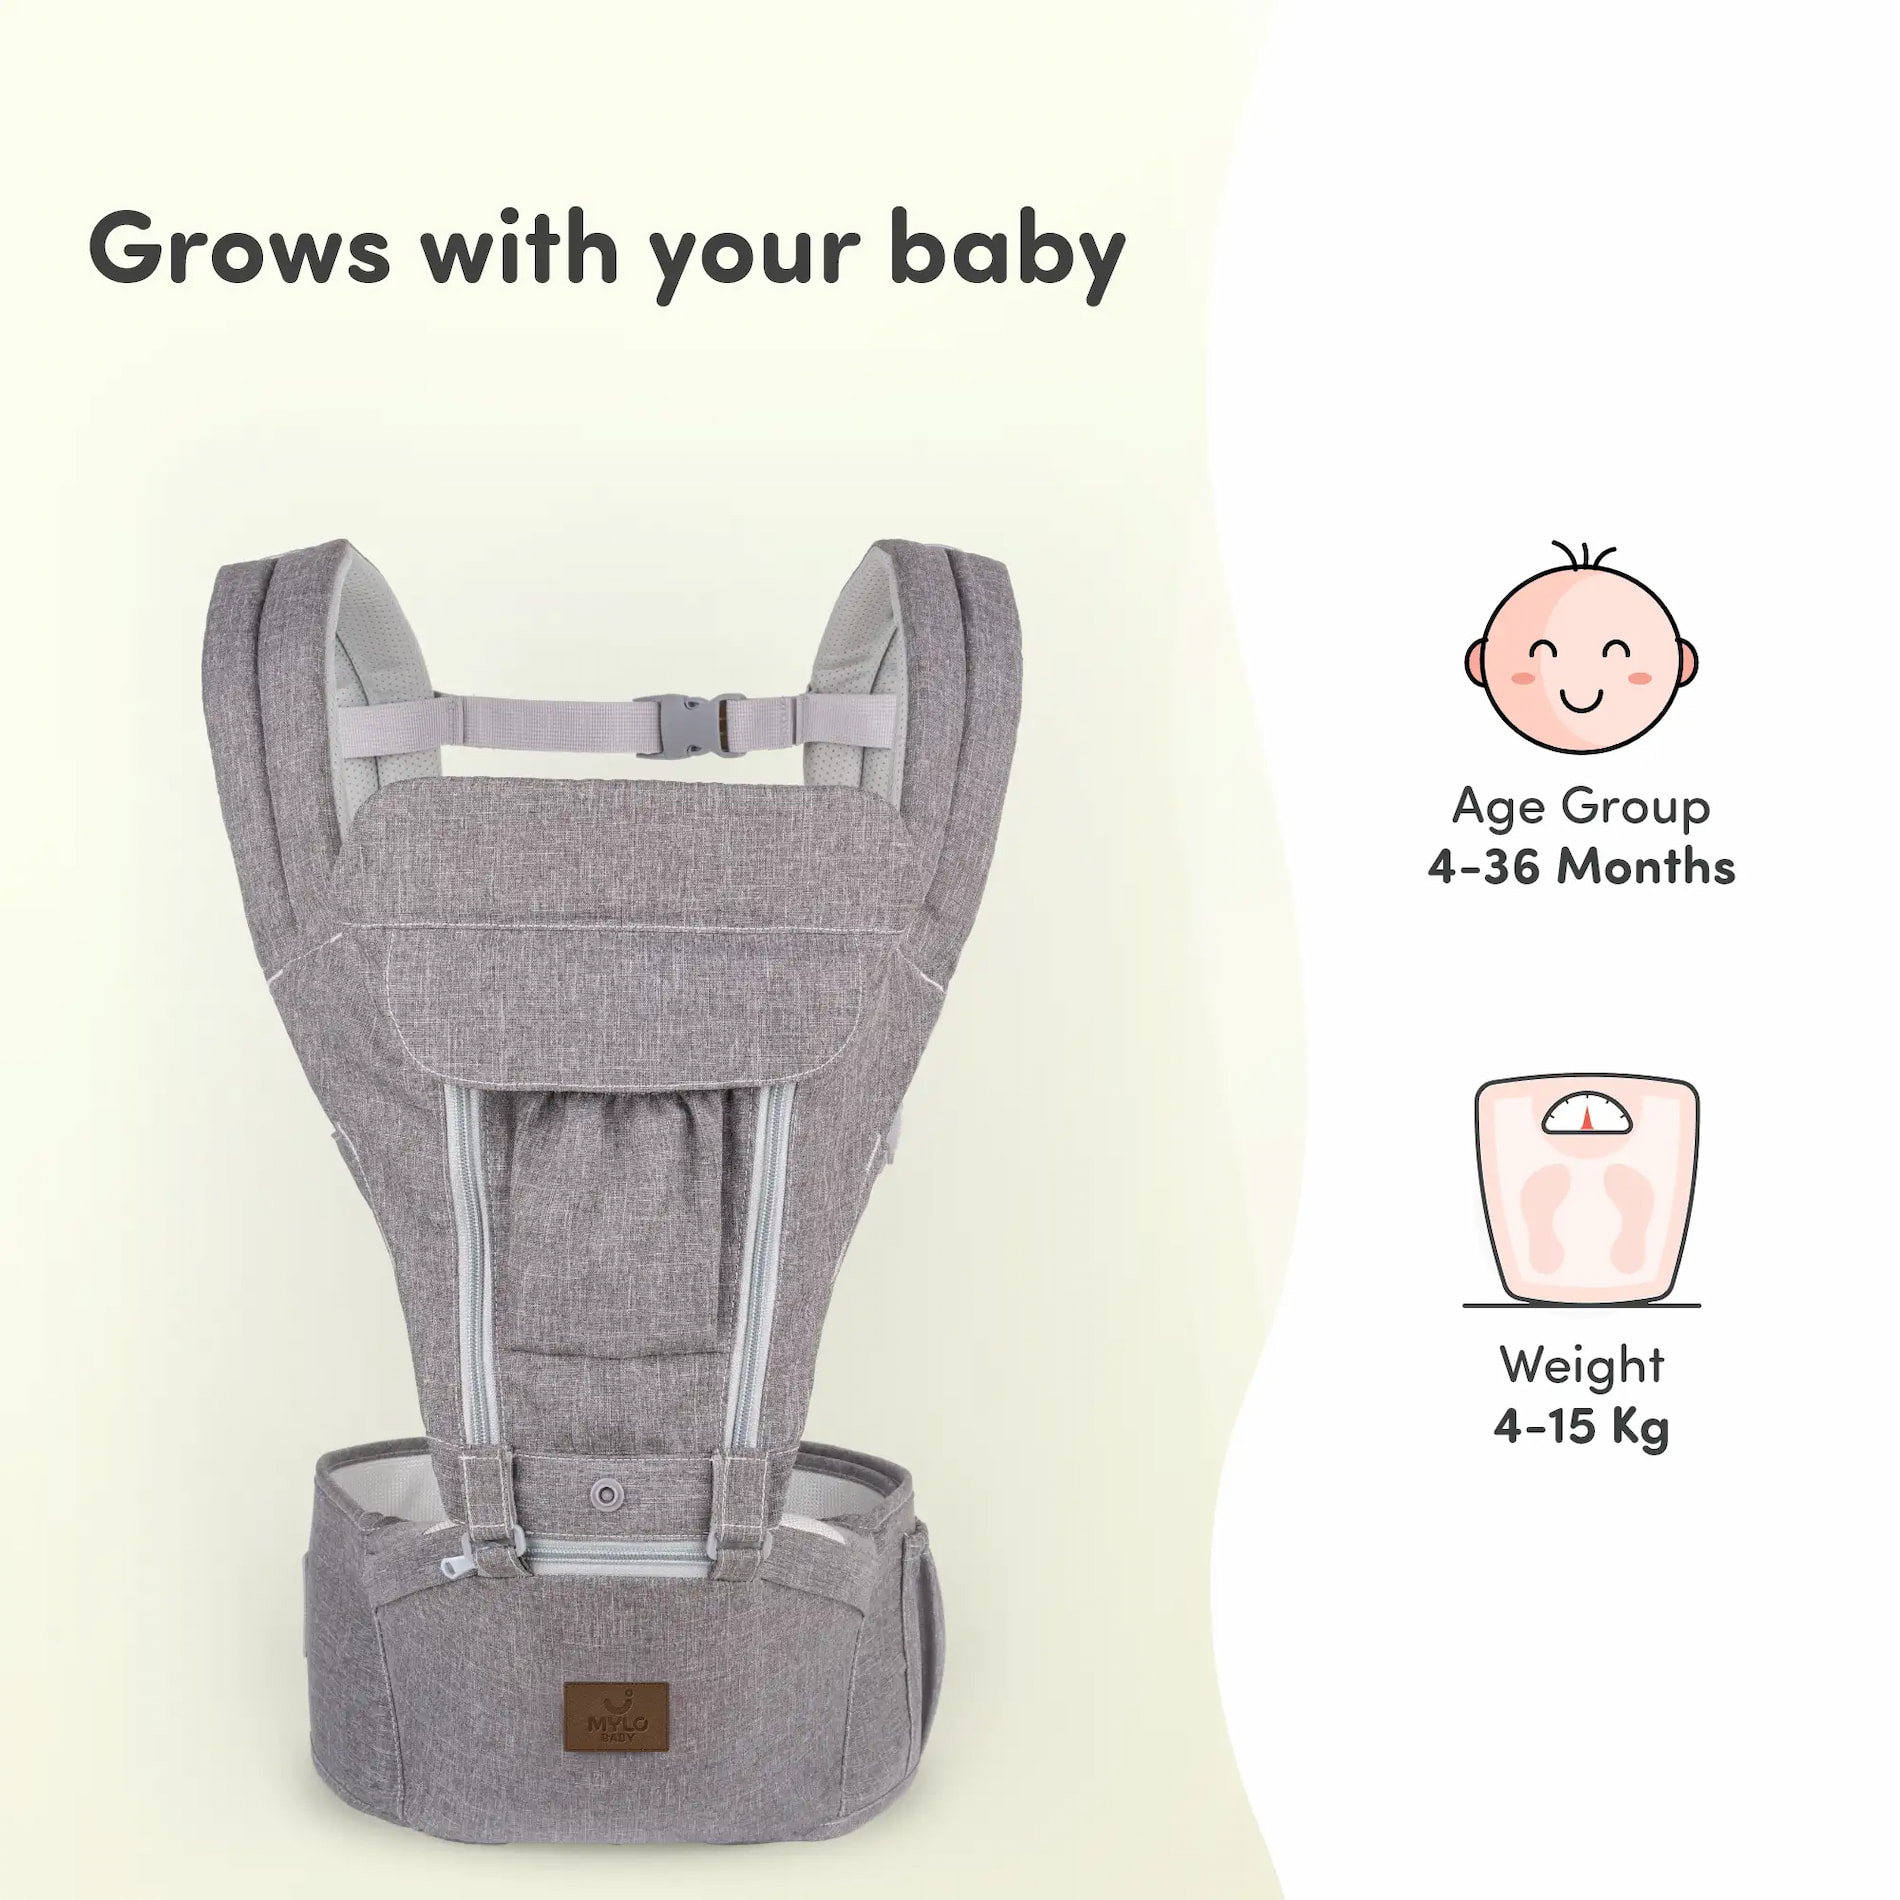 Riviera Premium Baby Carrier Bag for 0 to 3 Year Baby with 6 Comfortable Carrying Positions | Premium Fabric | Wider Waist Belt | Ergonomic Hip Seat - Grey